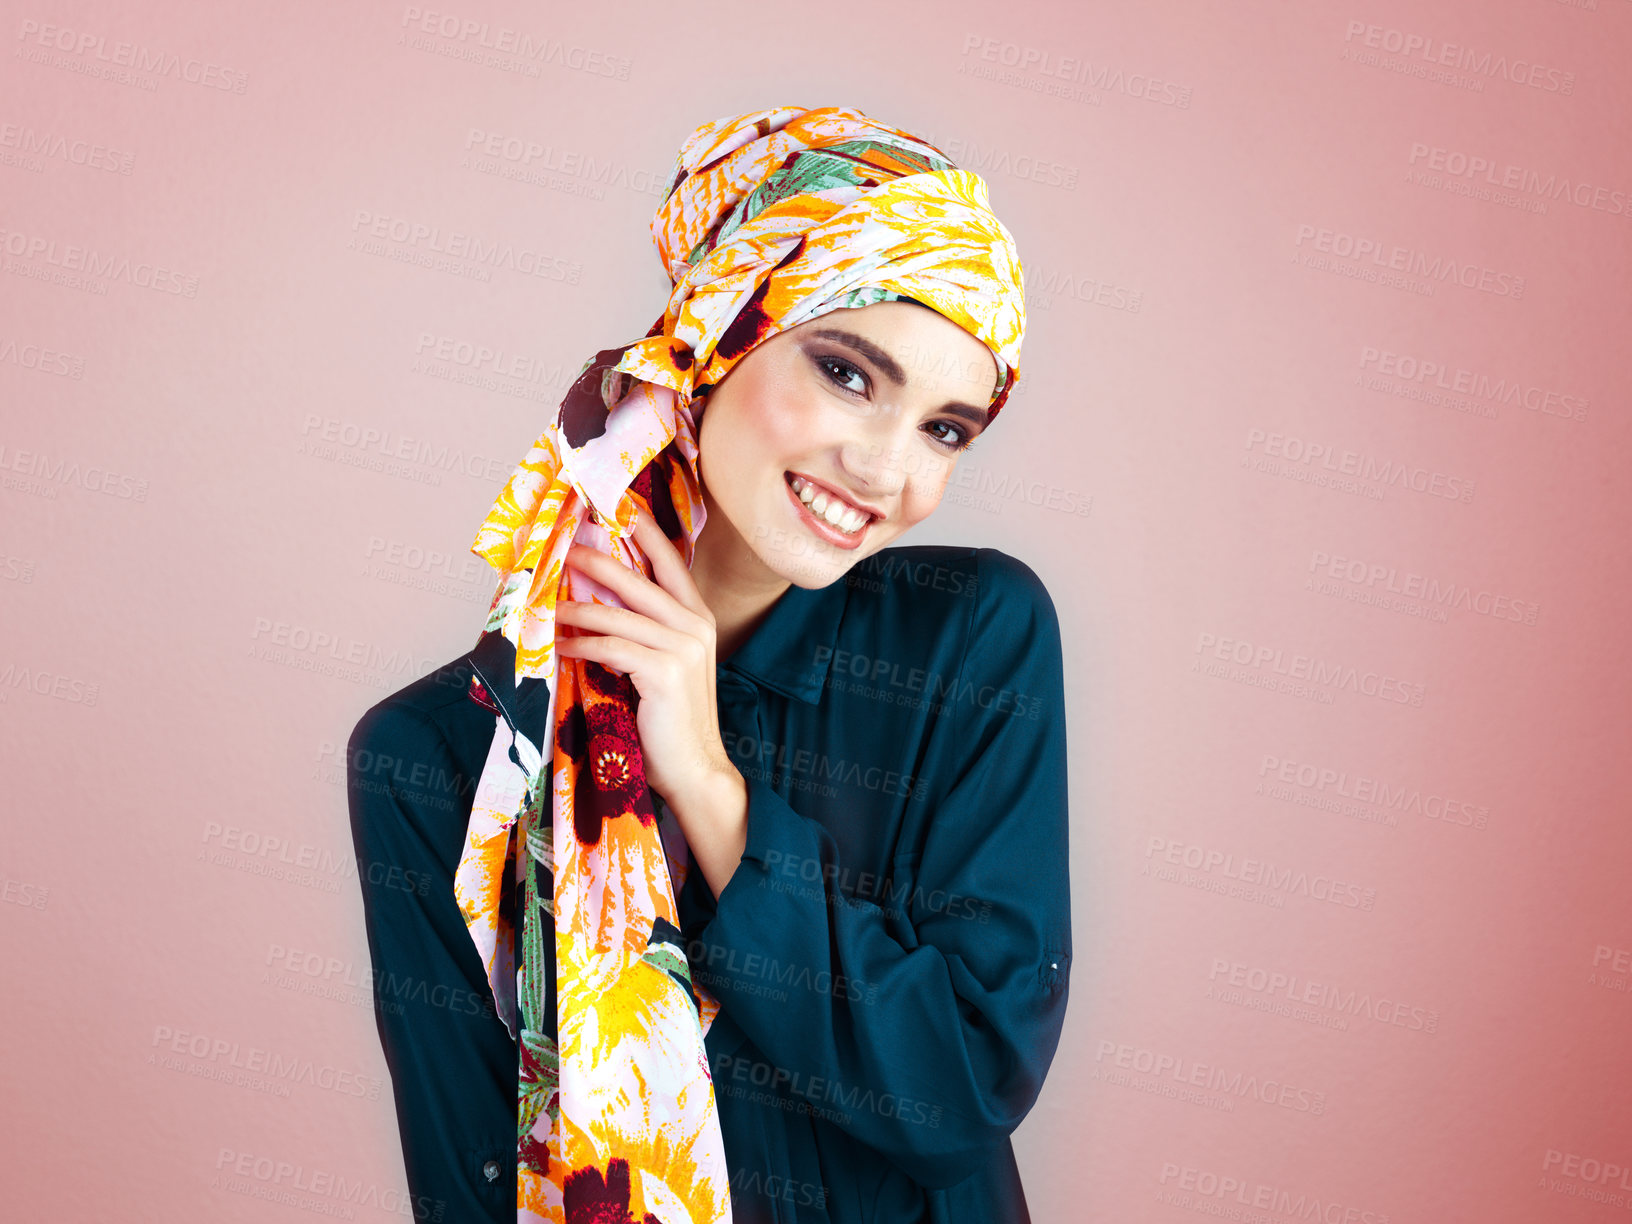 Buy stock photo Studio portrait of a confident young woman wearing a colorful head scarf while posing against a pink background